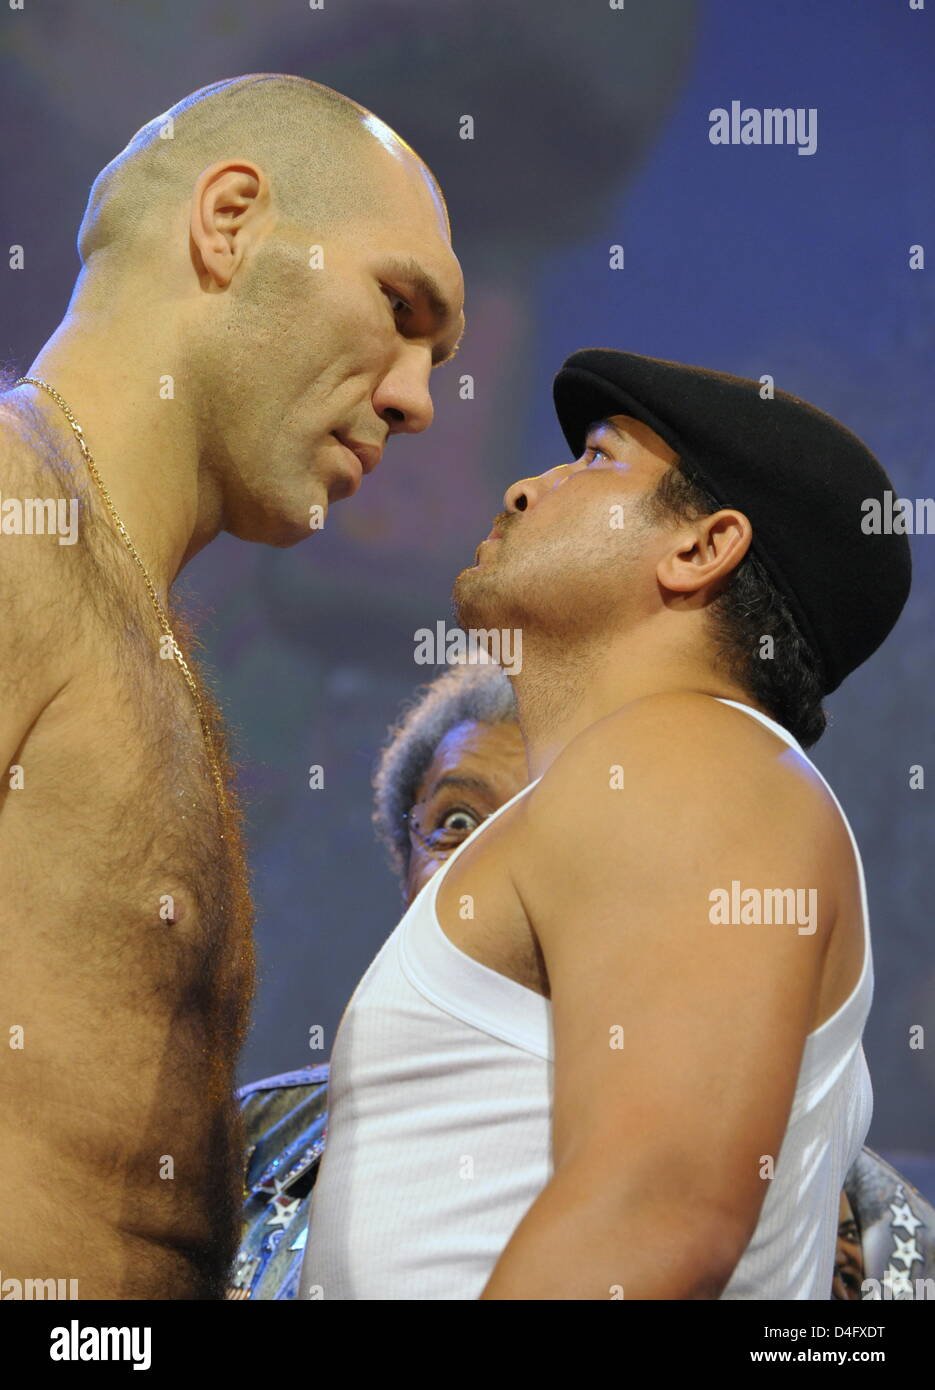 Russian WBA Heavyweight Champion Nikolai Valuev (L) and his US contender John Ruiz (R) face off after the official weighing in Berlin, Germany, 29 August 2008. Valuev and Ruiz will box for the WBA heavyweight title on 30 August in Berlin. Photo: SOEREN STACHE Stock Photo